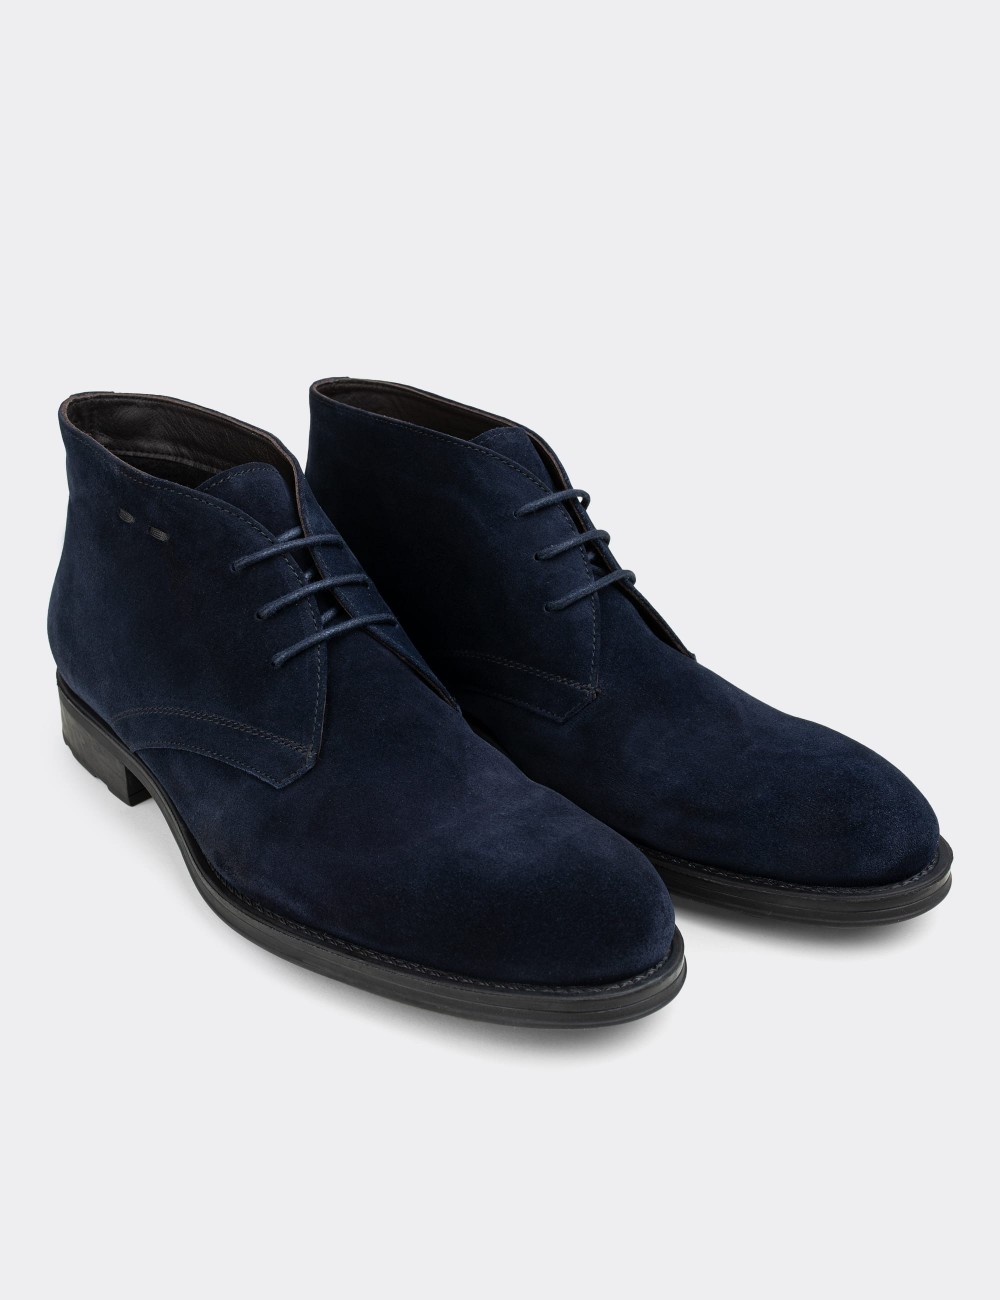 Navy Suede Leather Desert Boots - 01295MLCVC04